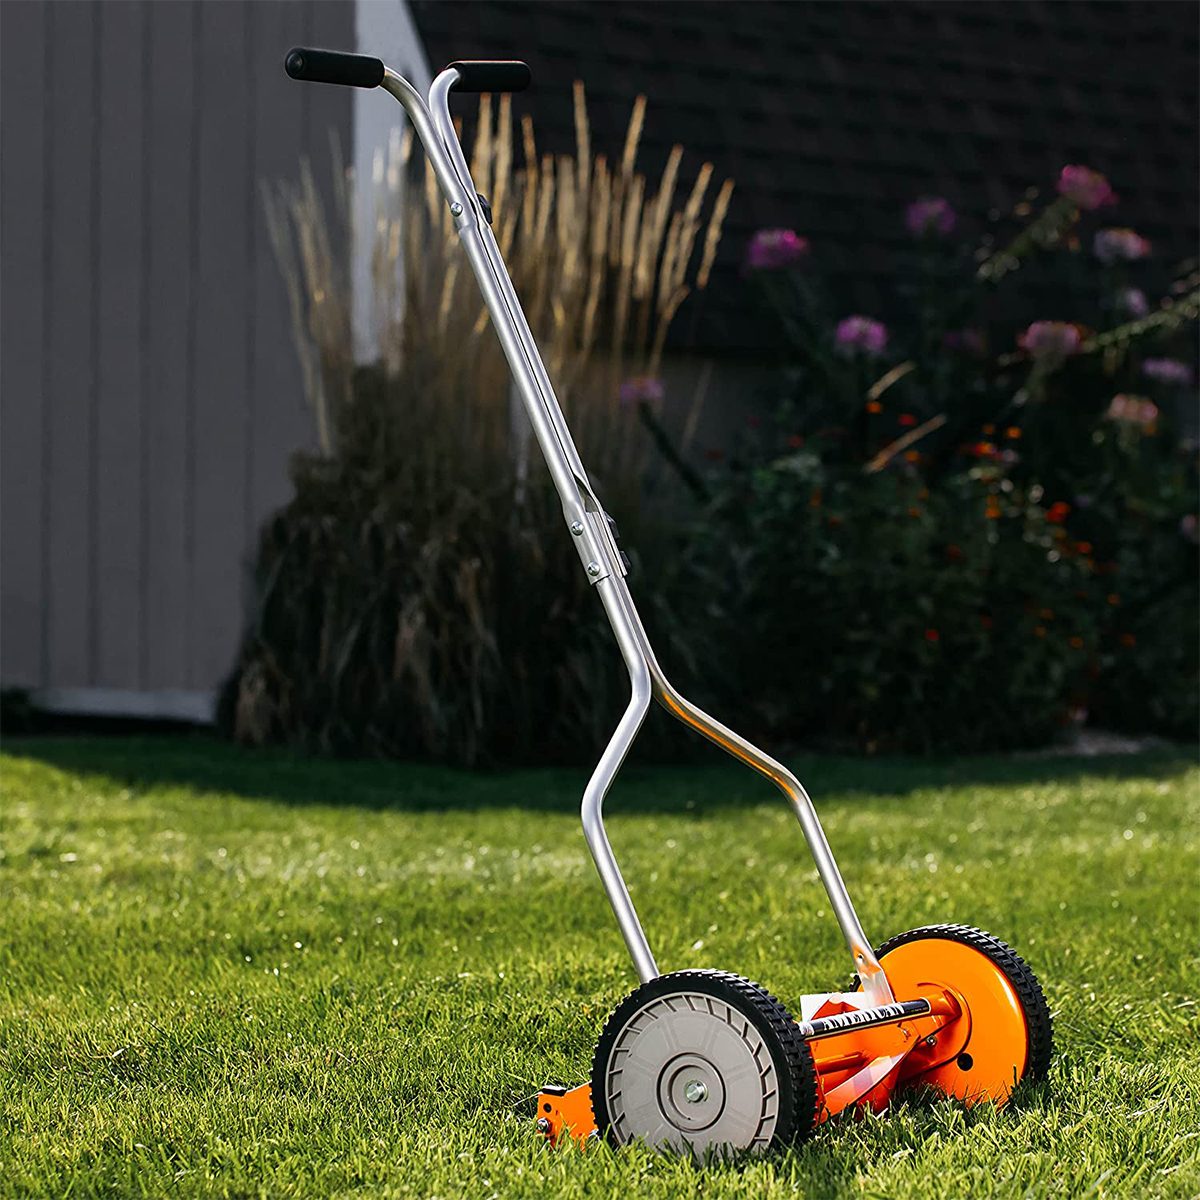 https://www.familyhandyman.com/wp-content/uploads/2021/05/Best-Cheap-Lawn-Mower-Models-to-Tame-Your-Grass-for-Less_FT_via-amazon.com_.jpg